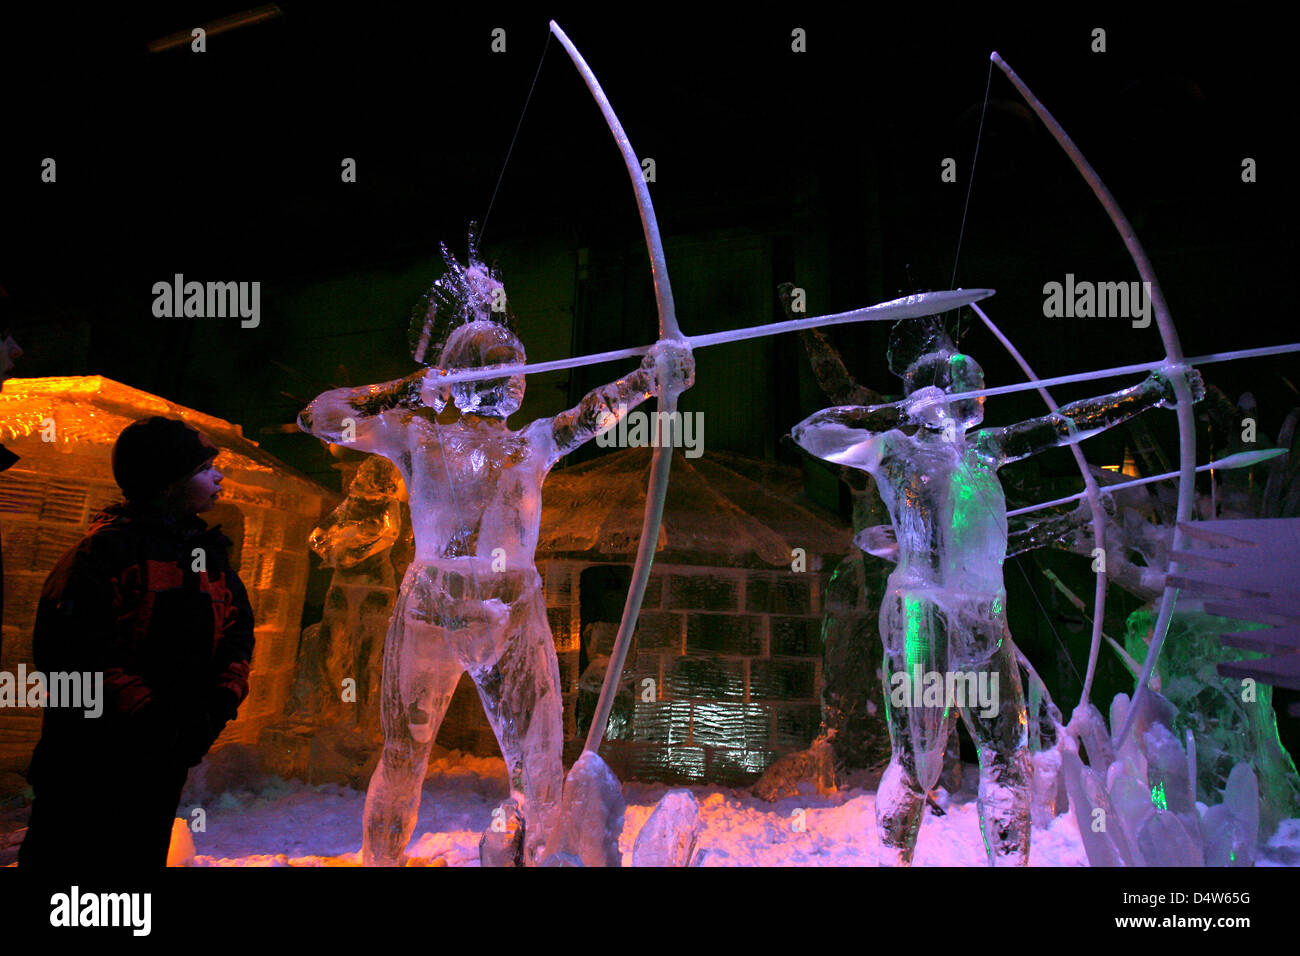 A boy looks at bowmen made out of ice during a press appointment in a cold storage house in 'Karls Erlebnis-Dorf' in Roevershagen near Rostock, Germany, 22 December 2009. The figures are part of the '7. Eiszeit' dealing with the topic 'Welcome to the Jungle', which will open 25 December 2009. In a four-week work, 15 artists design a 2,000 square metre large ice and snow landsacpe.  Stock Photo